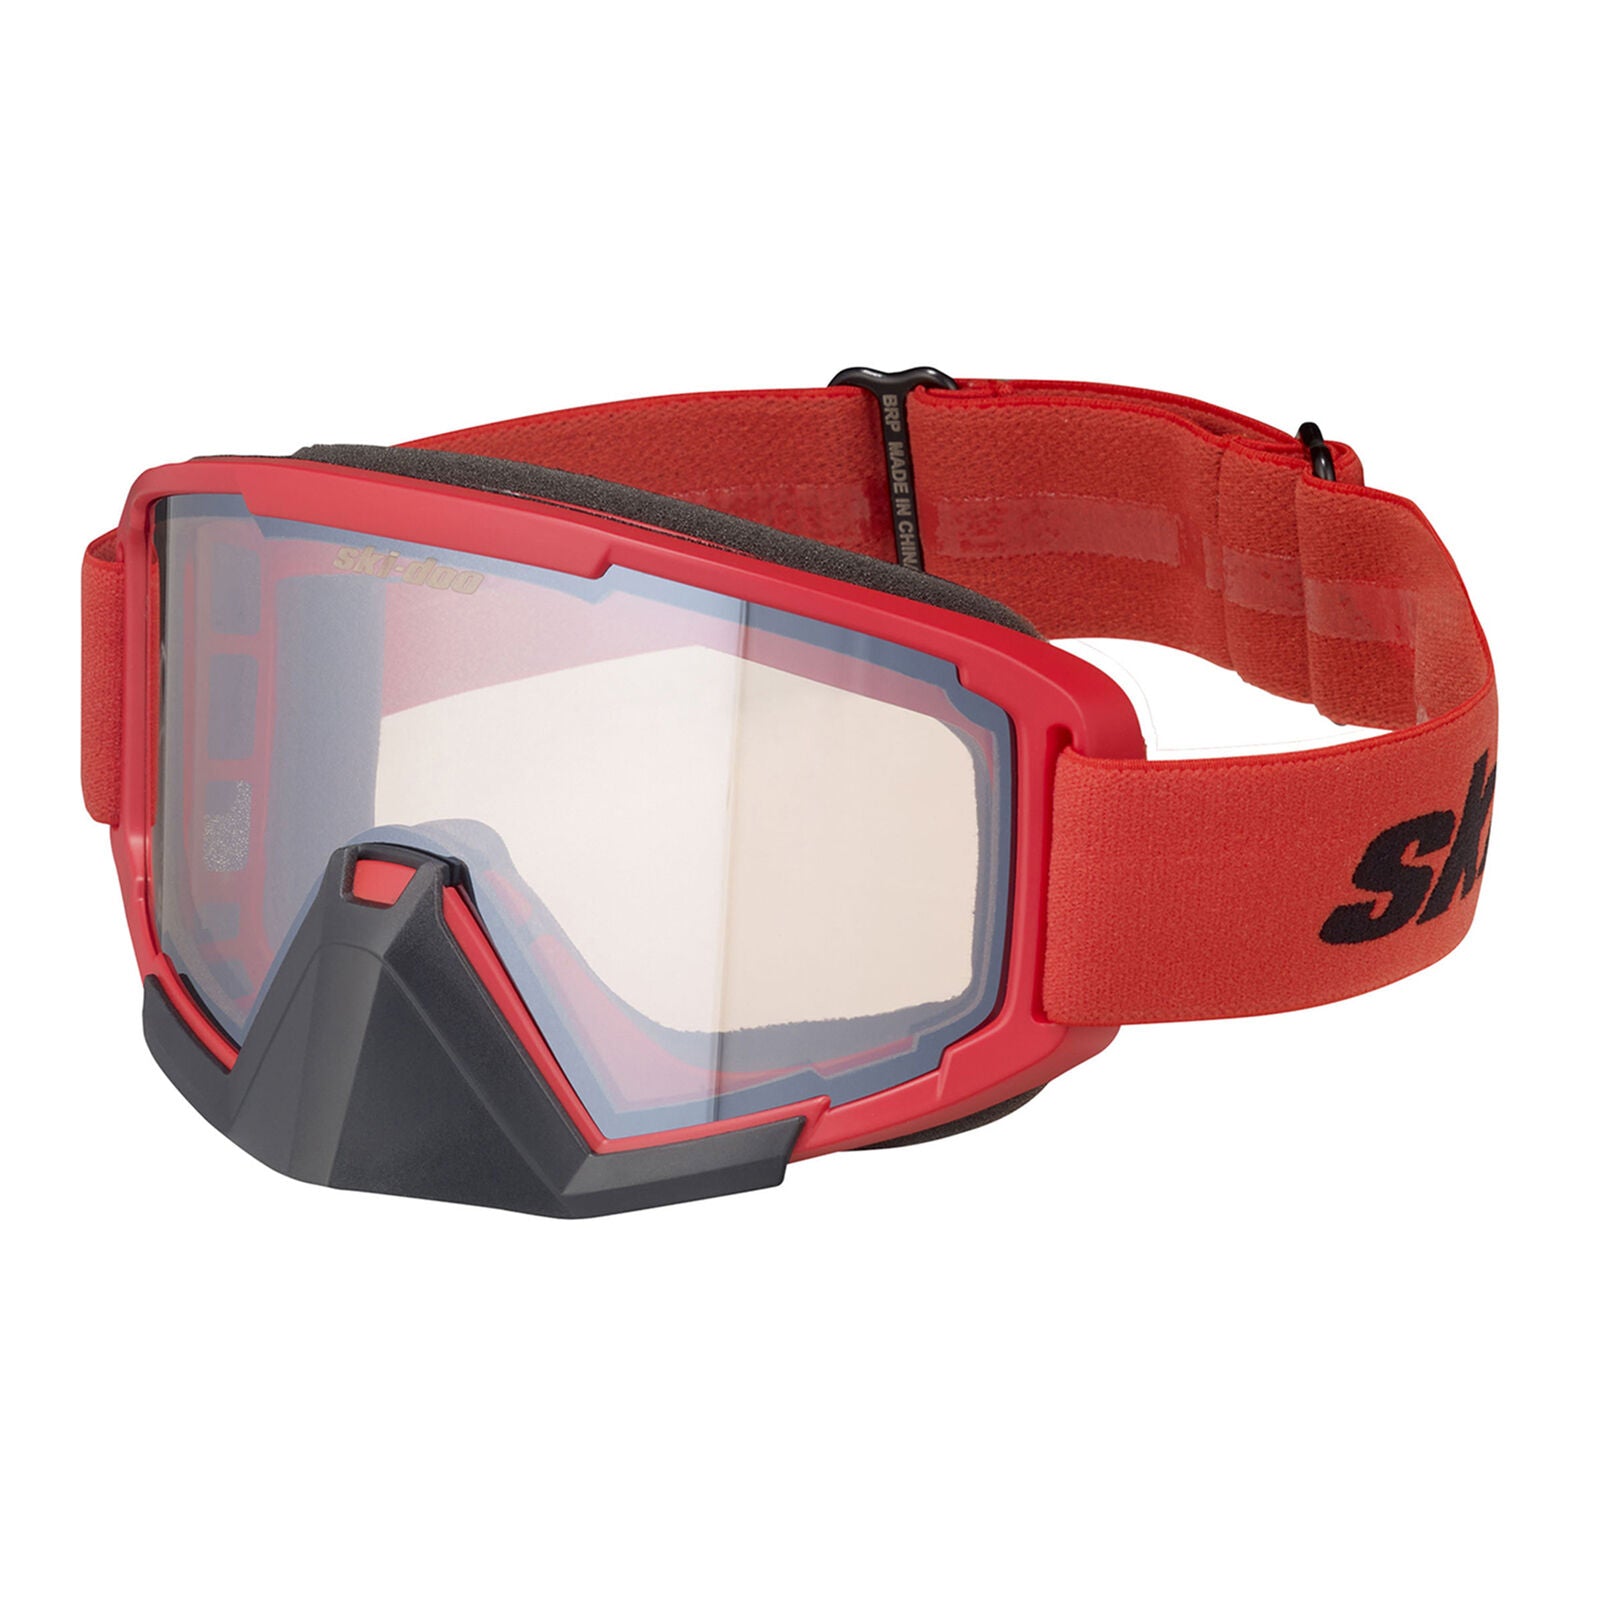 Ski-Doo Trench Goggles Red